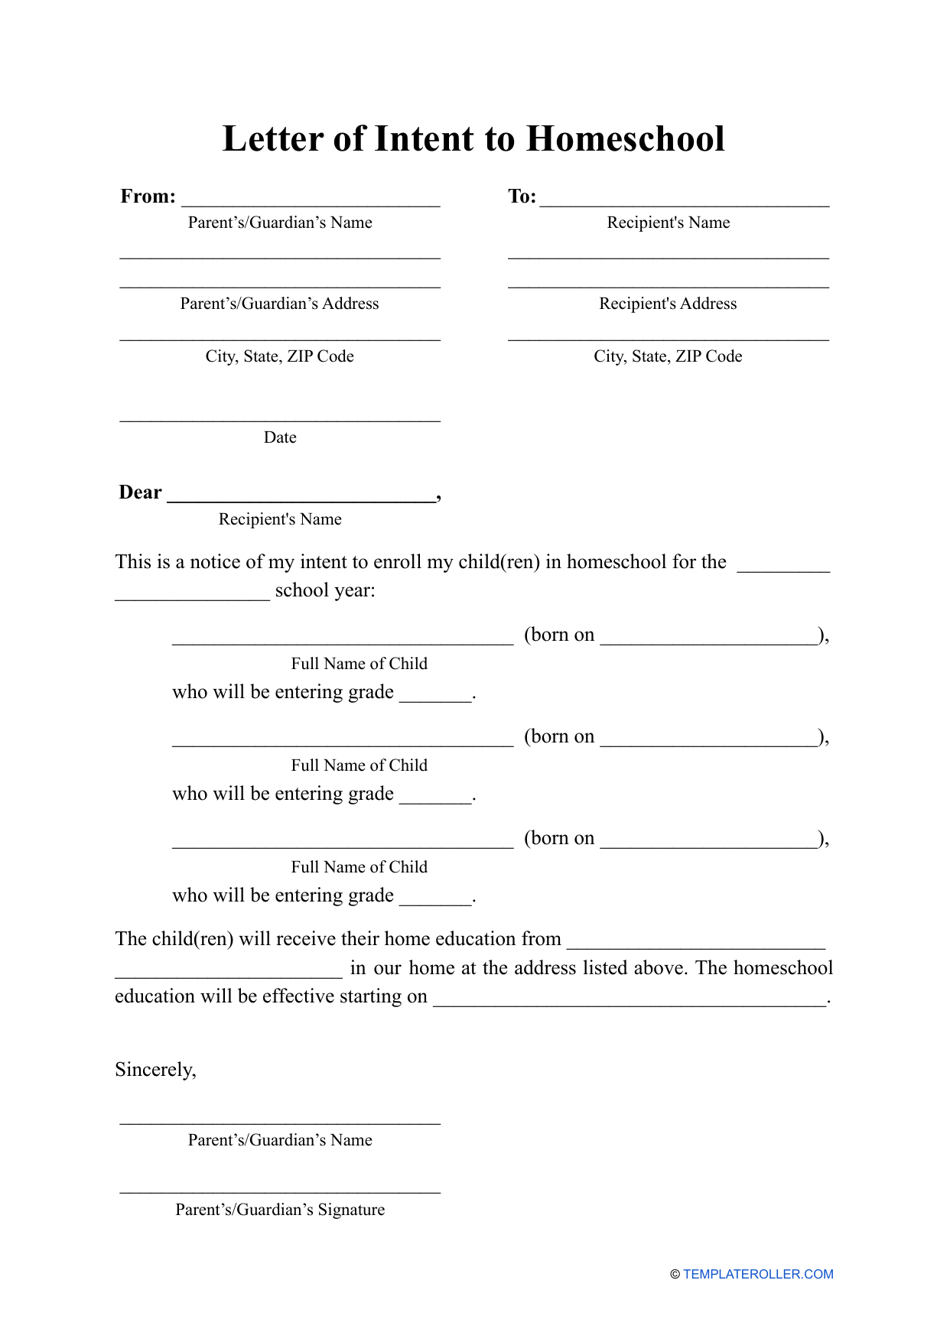 letter-of-intent-to-homeschool-template-download-printable-pdf